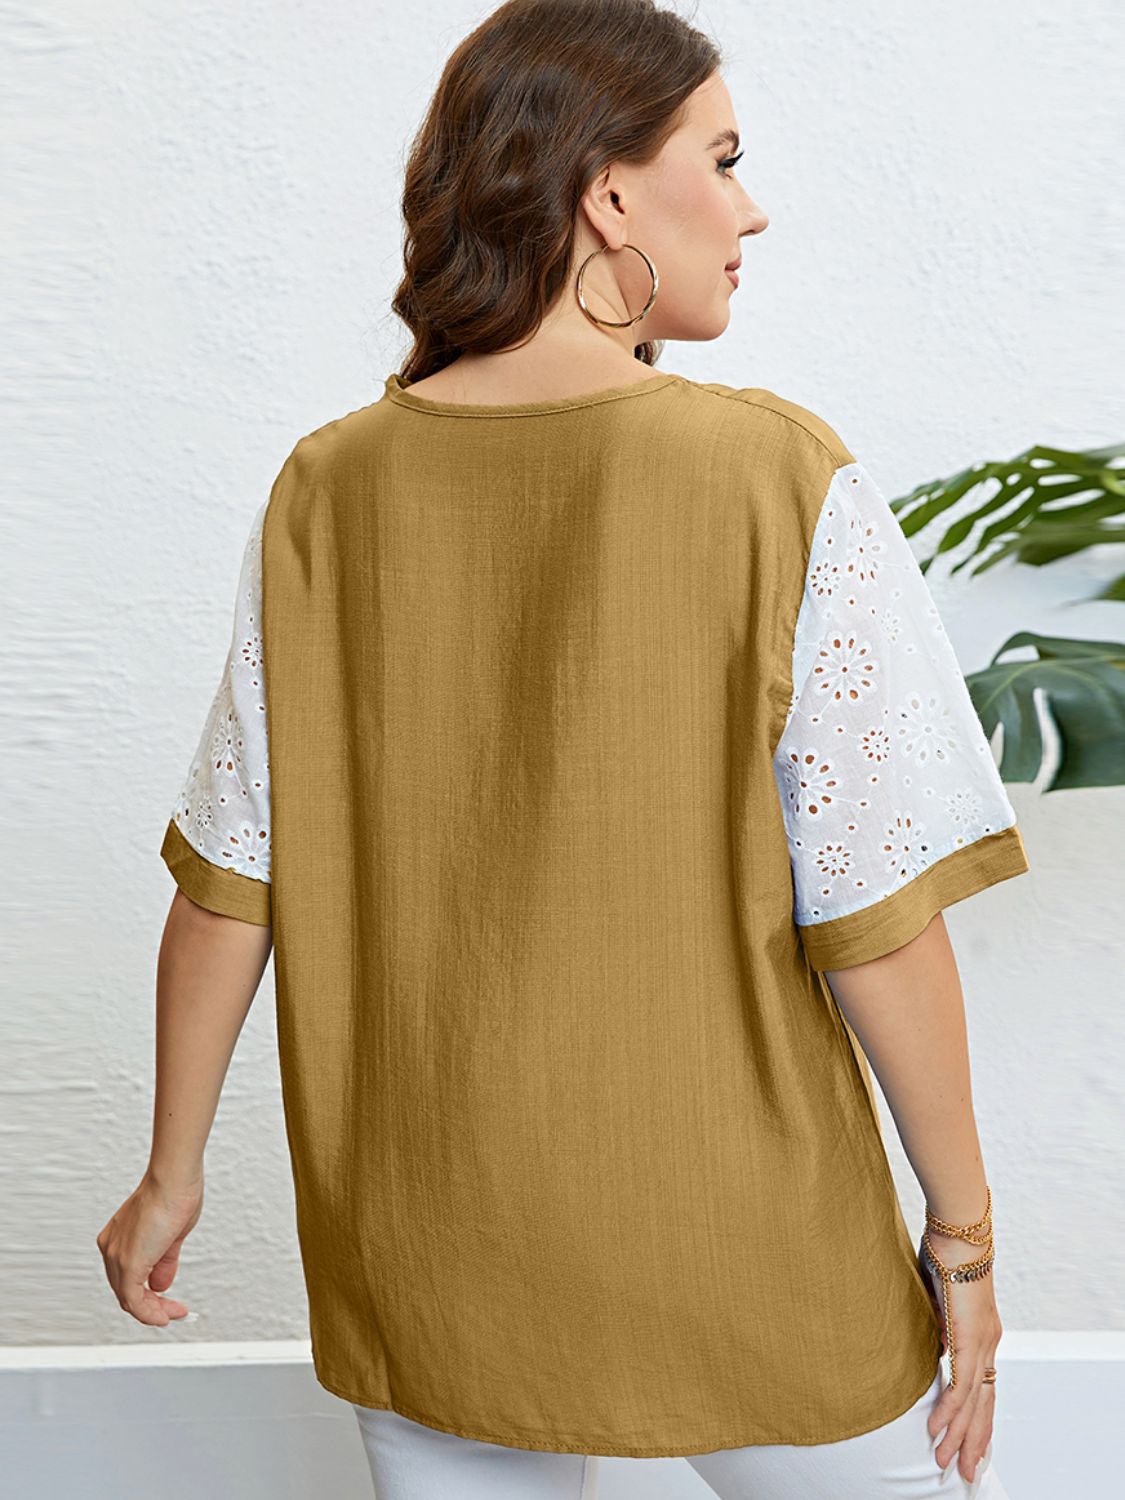 Plus Size Camel Colored Top with Contrast White laser cut short Sleeves, Back view, Hits right under bottom